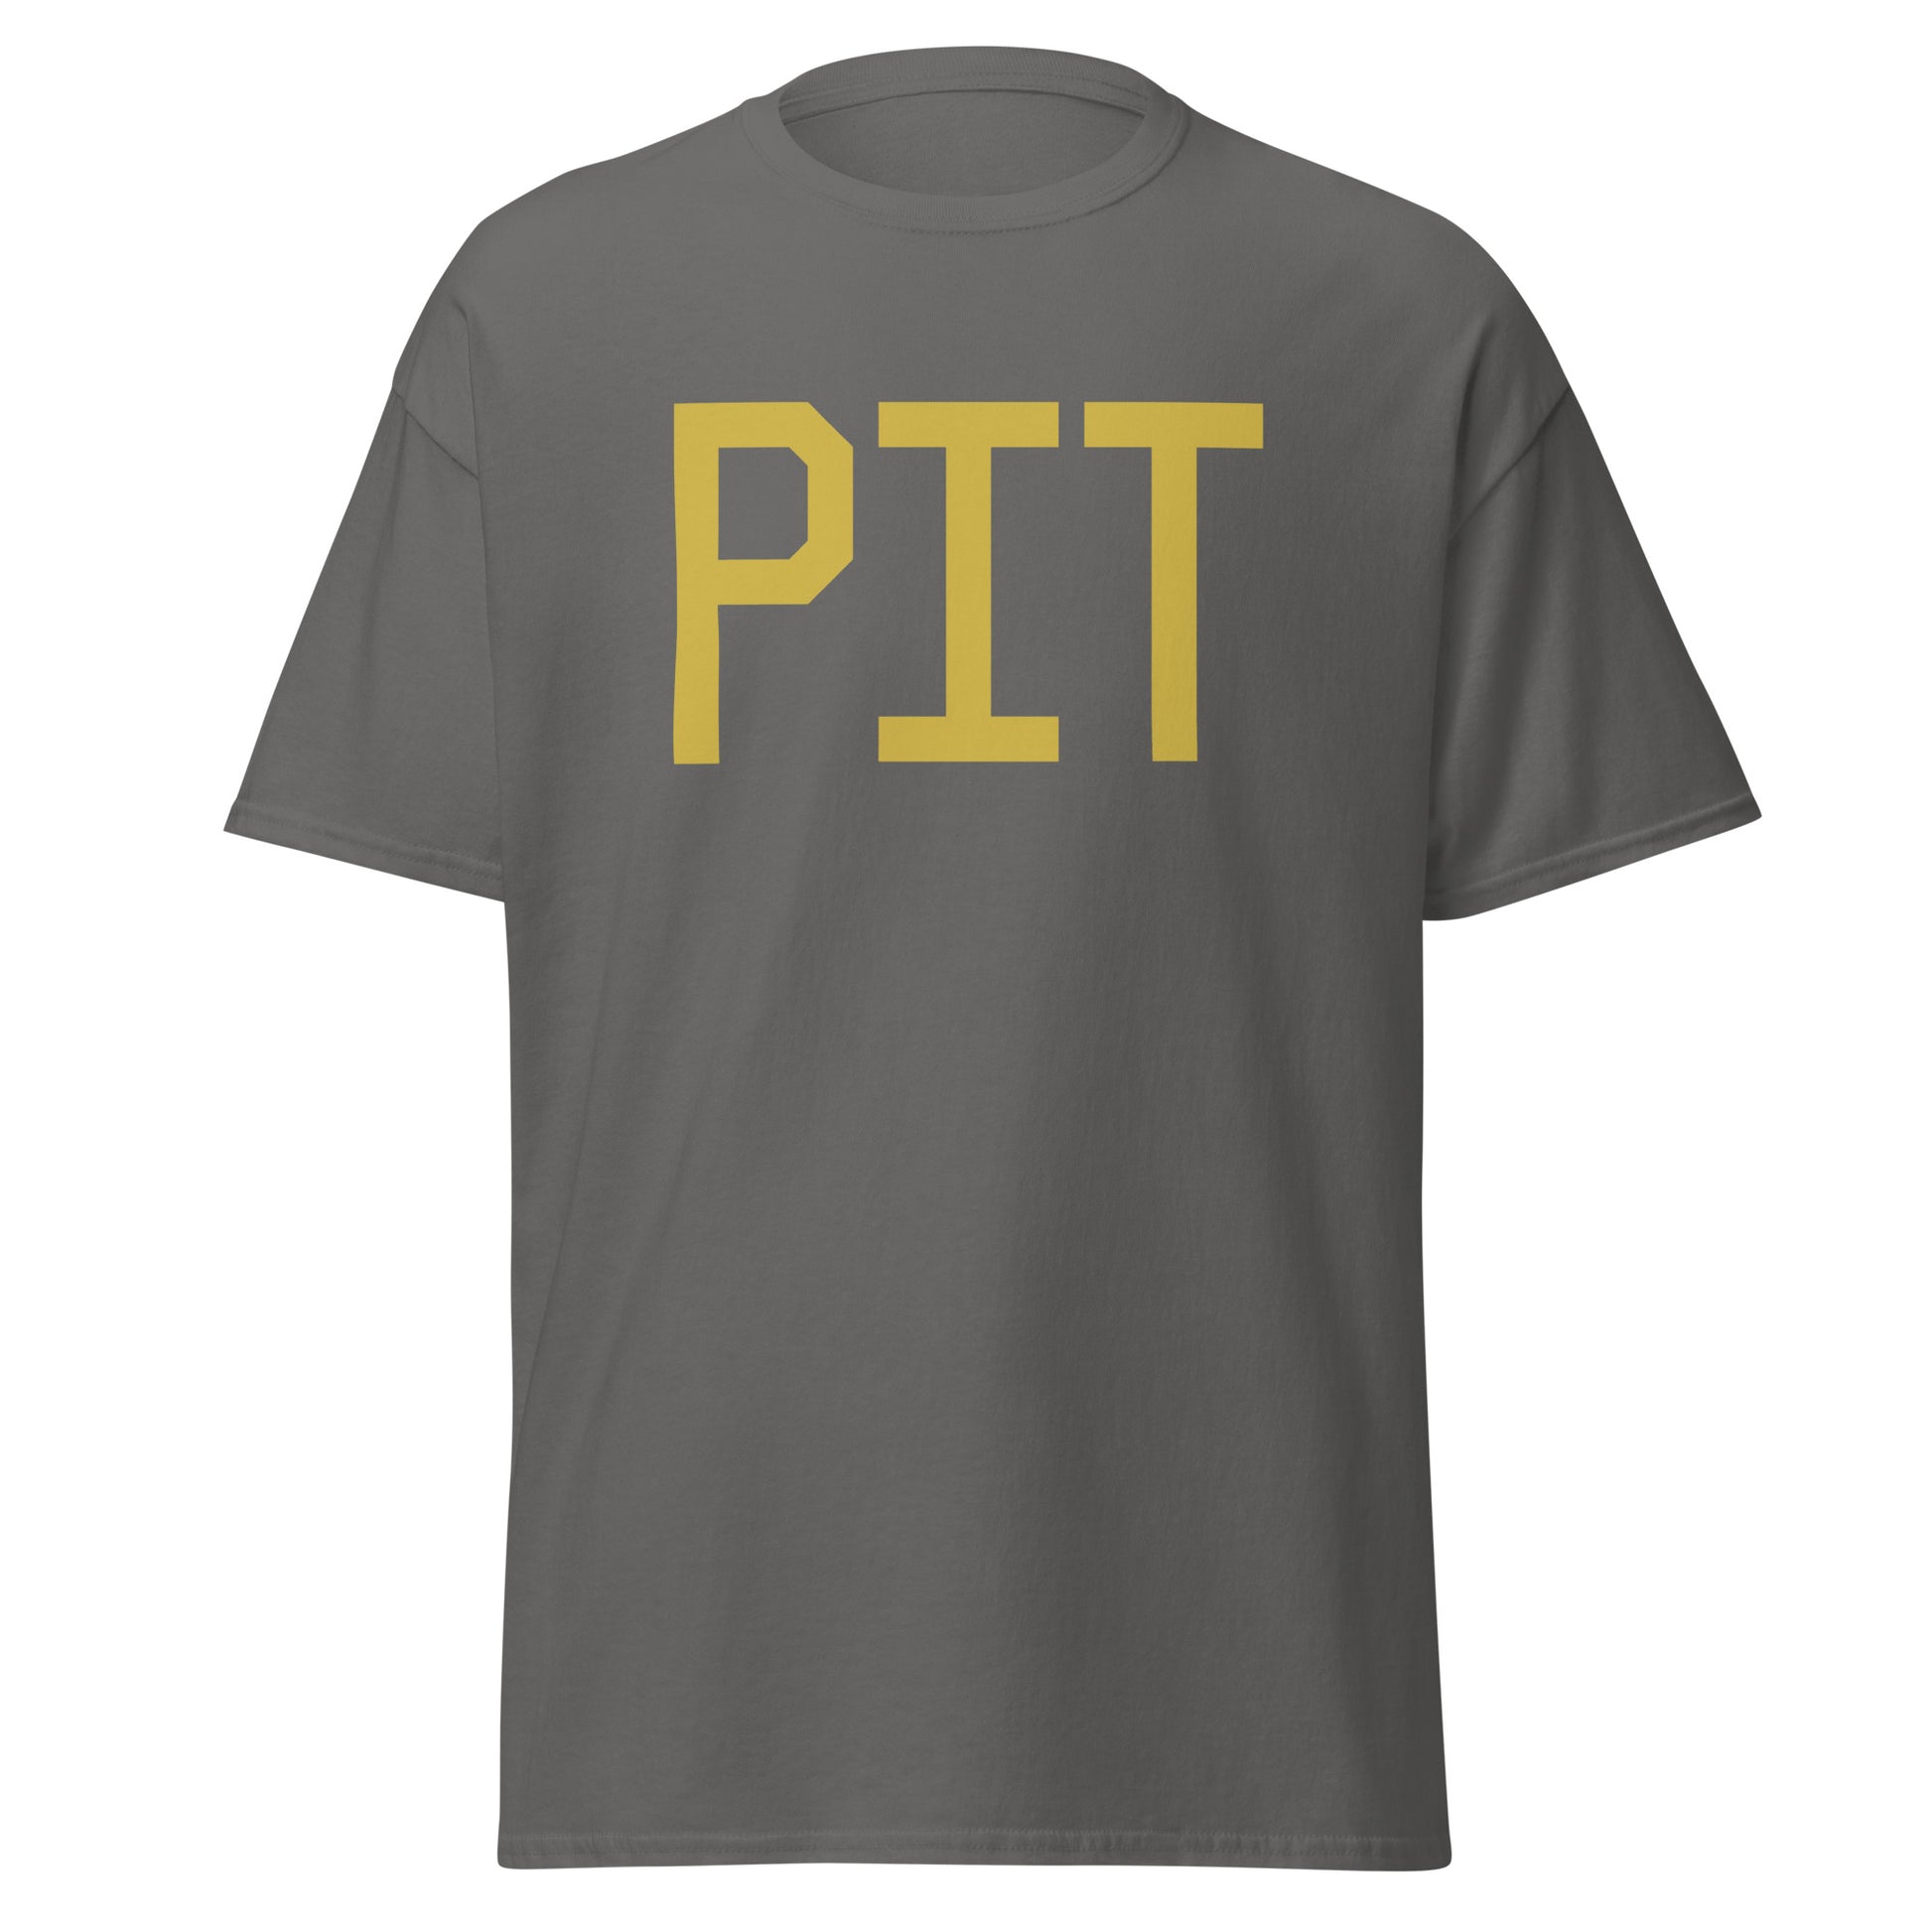 Aviation Enthusiast Men's Tee - Old Gold Graphic • PIT Pittsburgh • YHM Designs - Image 05